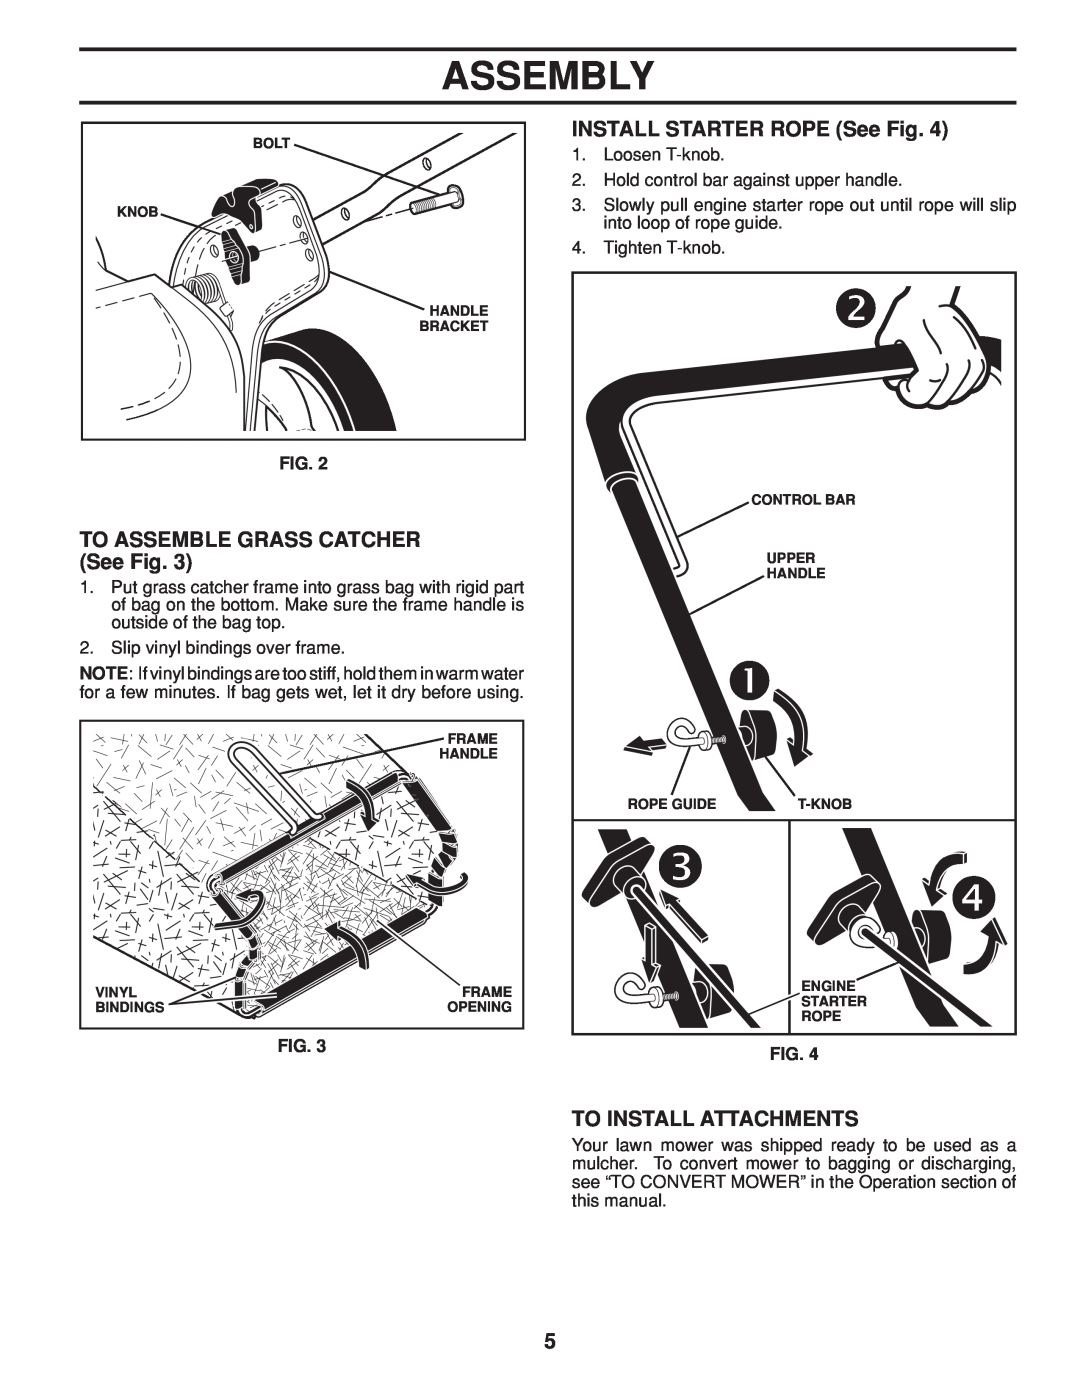 Husqvarna 961430096 TO ASSEMBLE GRASS CATCHER See Fig, INSTALL STARTER ROPE See Fig, To Install Attachments, Assembly 